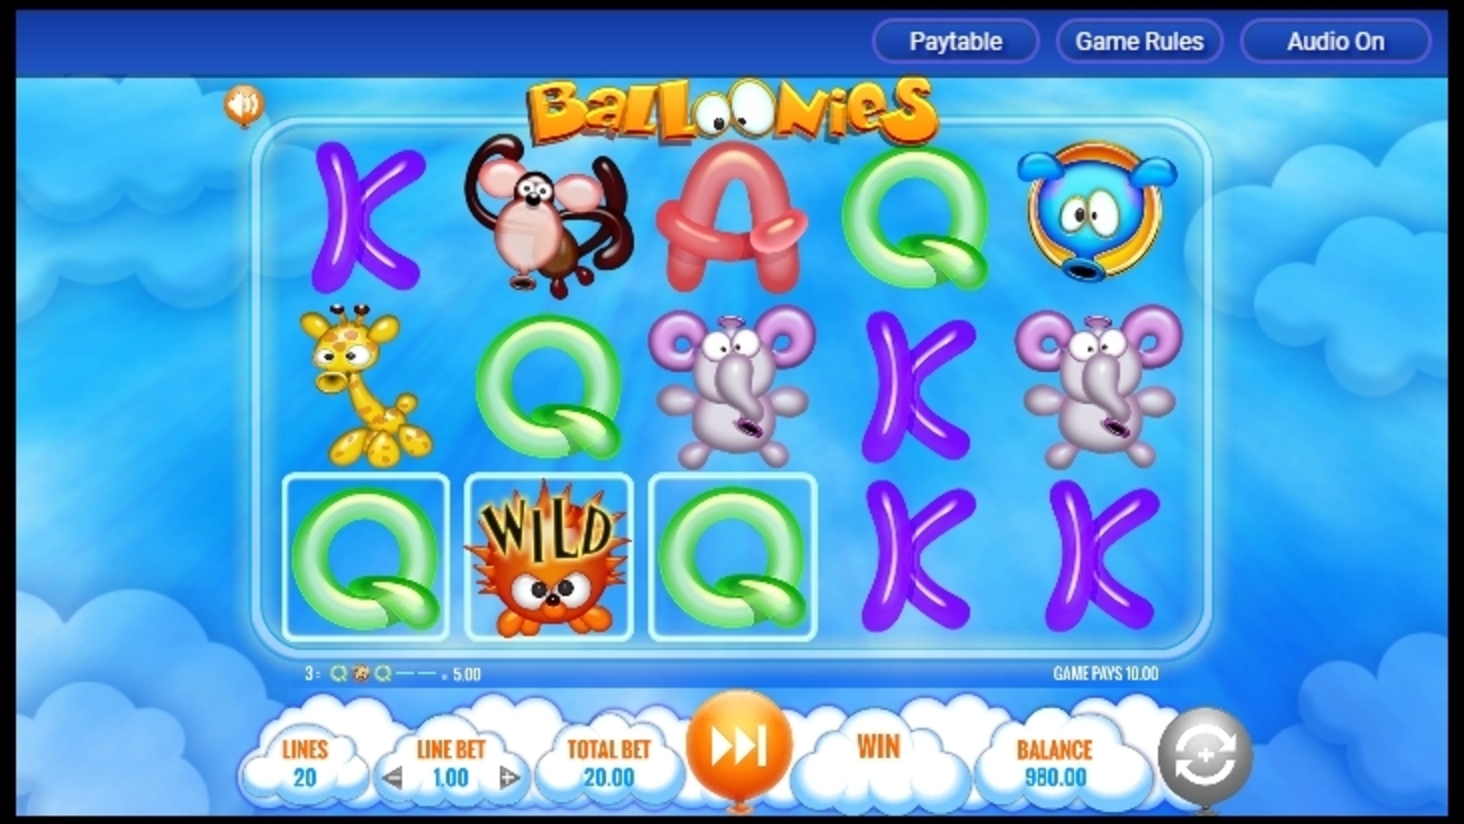 Win Money in Balloonies Free Slot Game by IGT